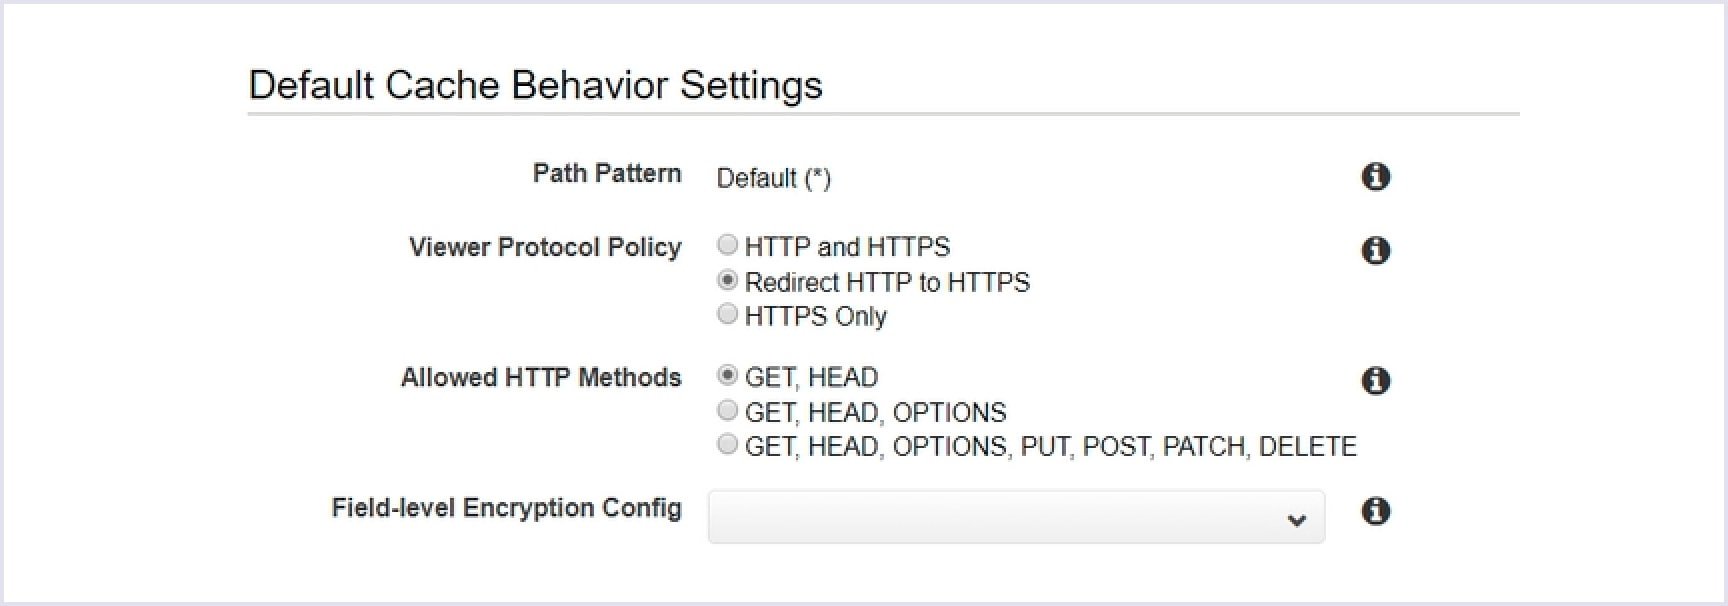 Choosing HTTPS for viewer protocol policy to serve a website over SSL